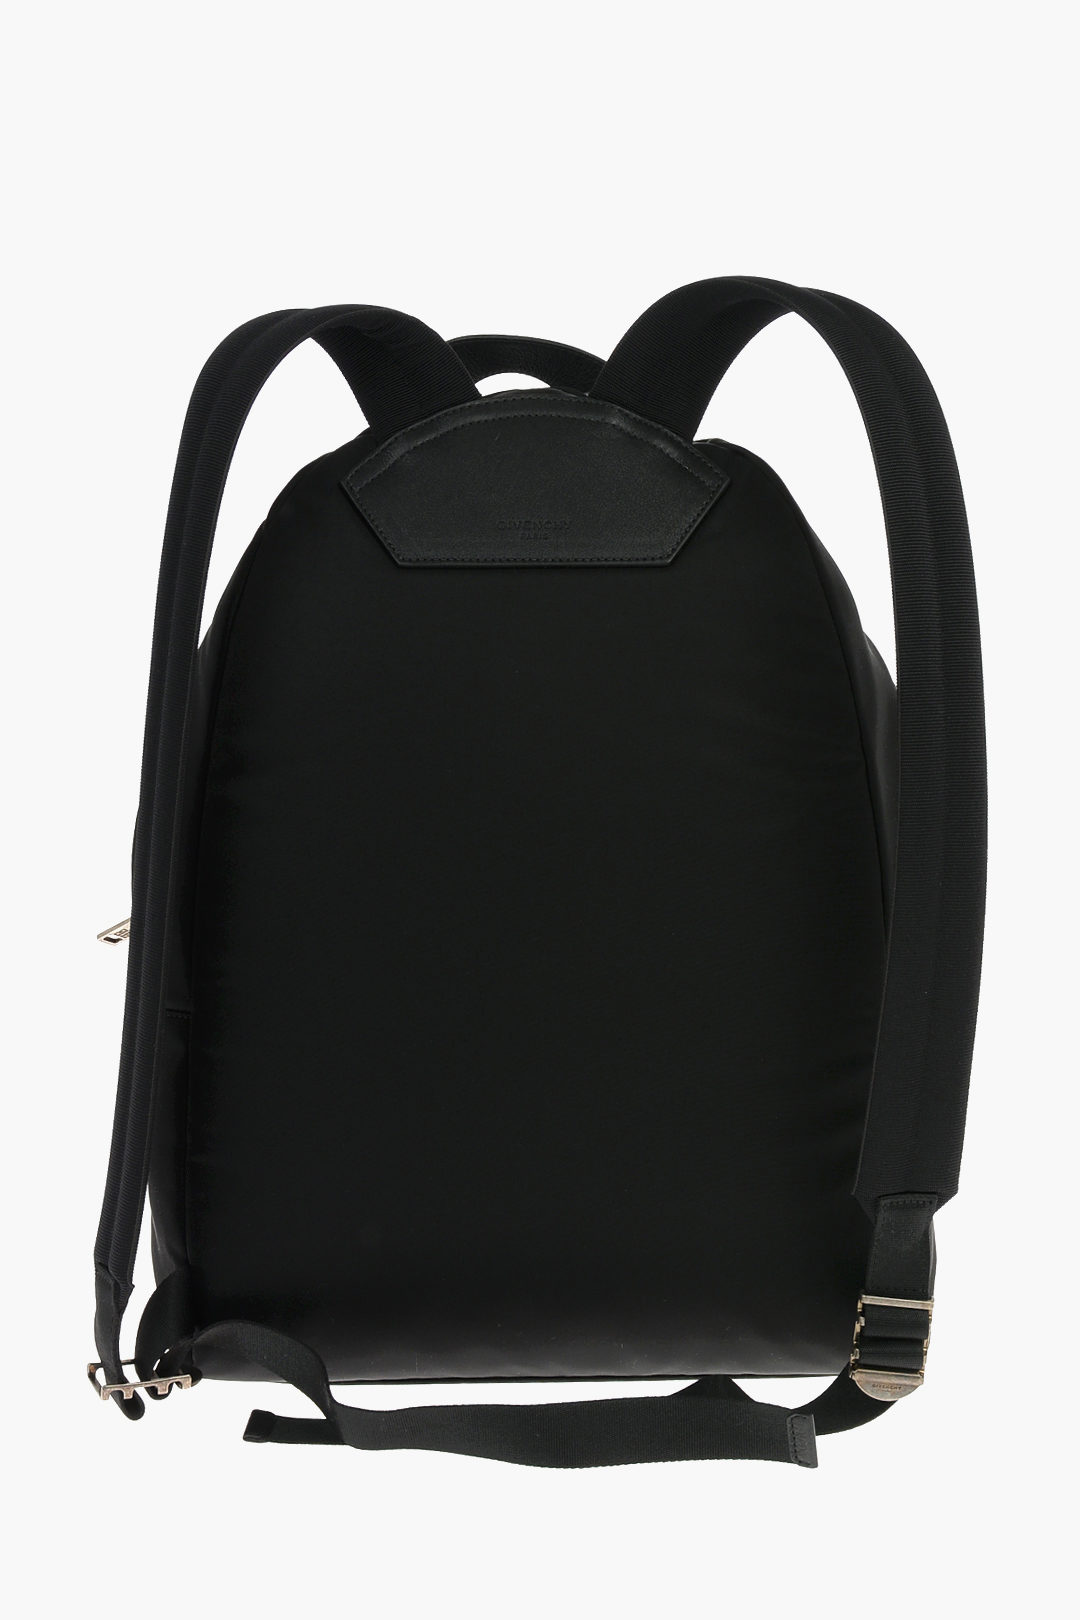 Givenchy Nylon Backpack with CREATURES Print men - Glamood Outlet